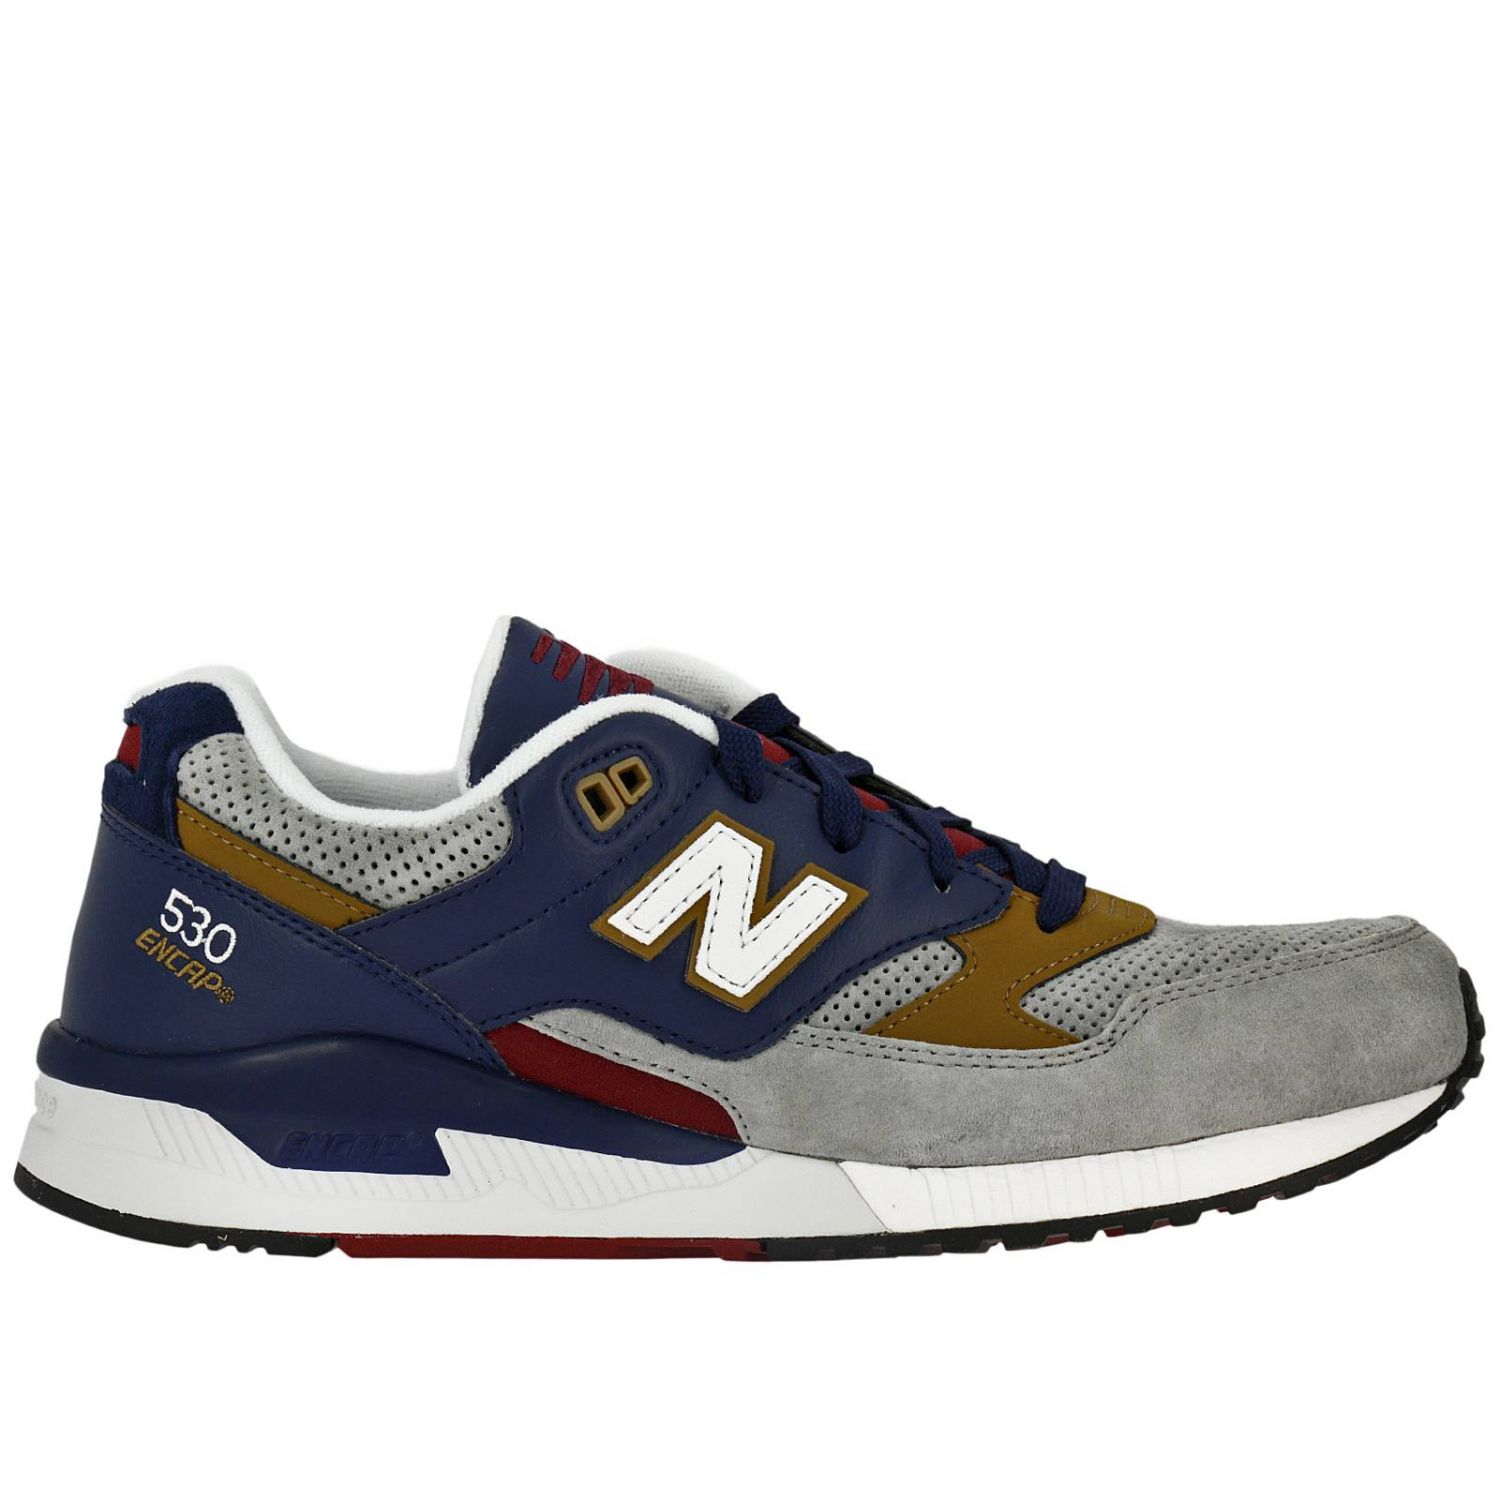 New Balance Outlet: Shoes men | Sneakers New Balance Men Grey | Sneakers New Balance M530RWB